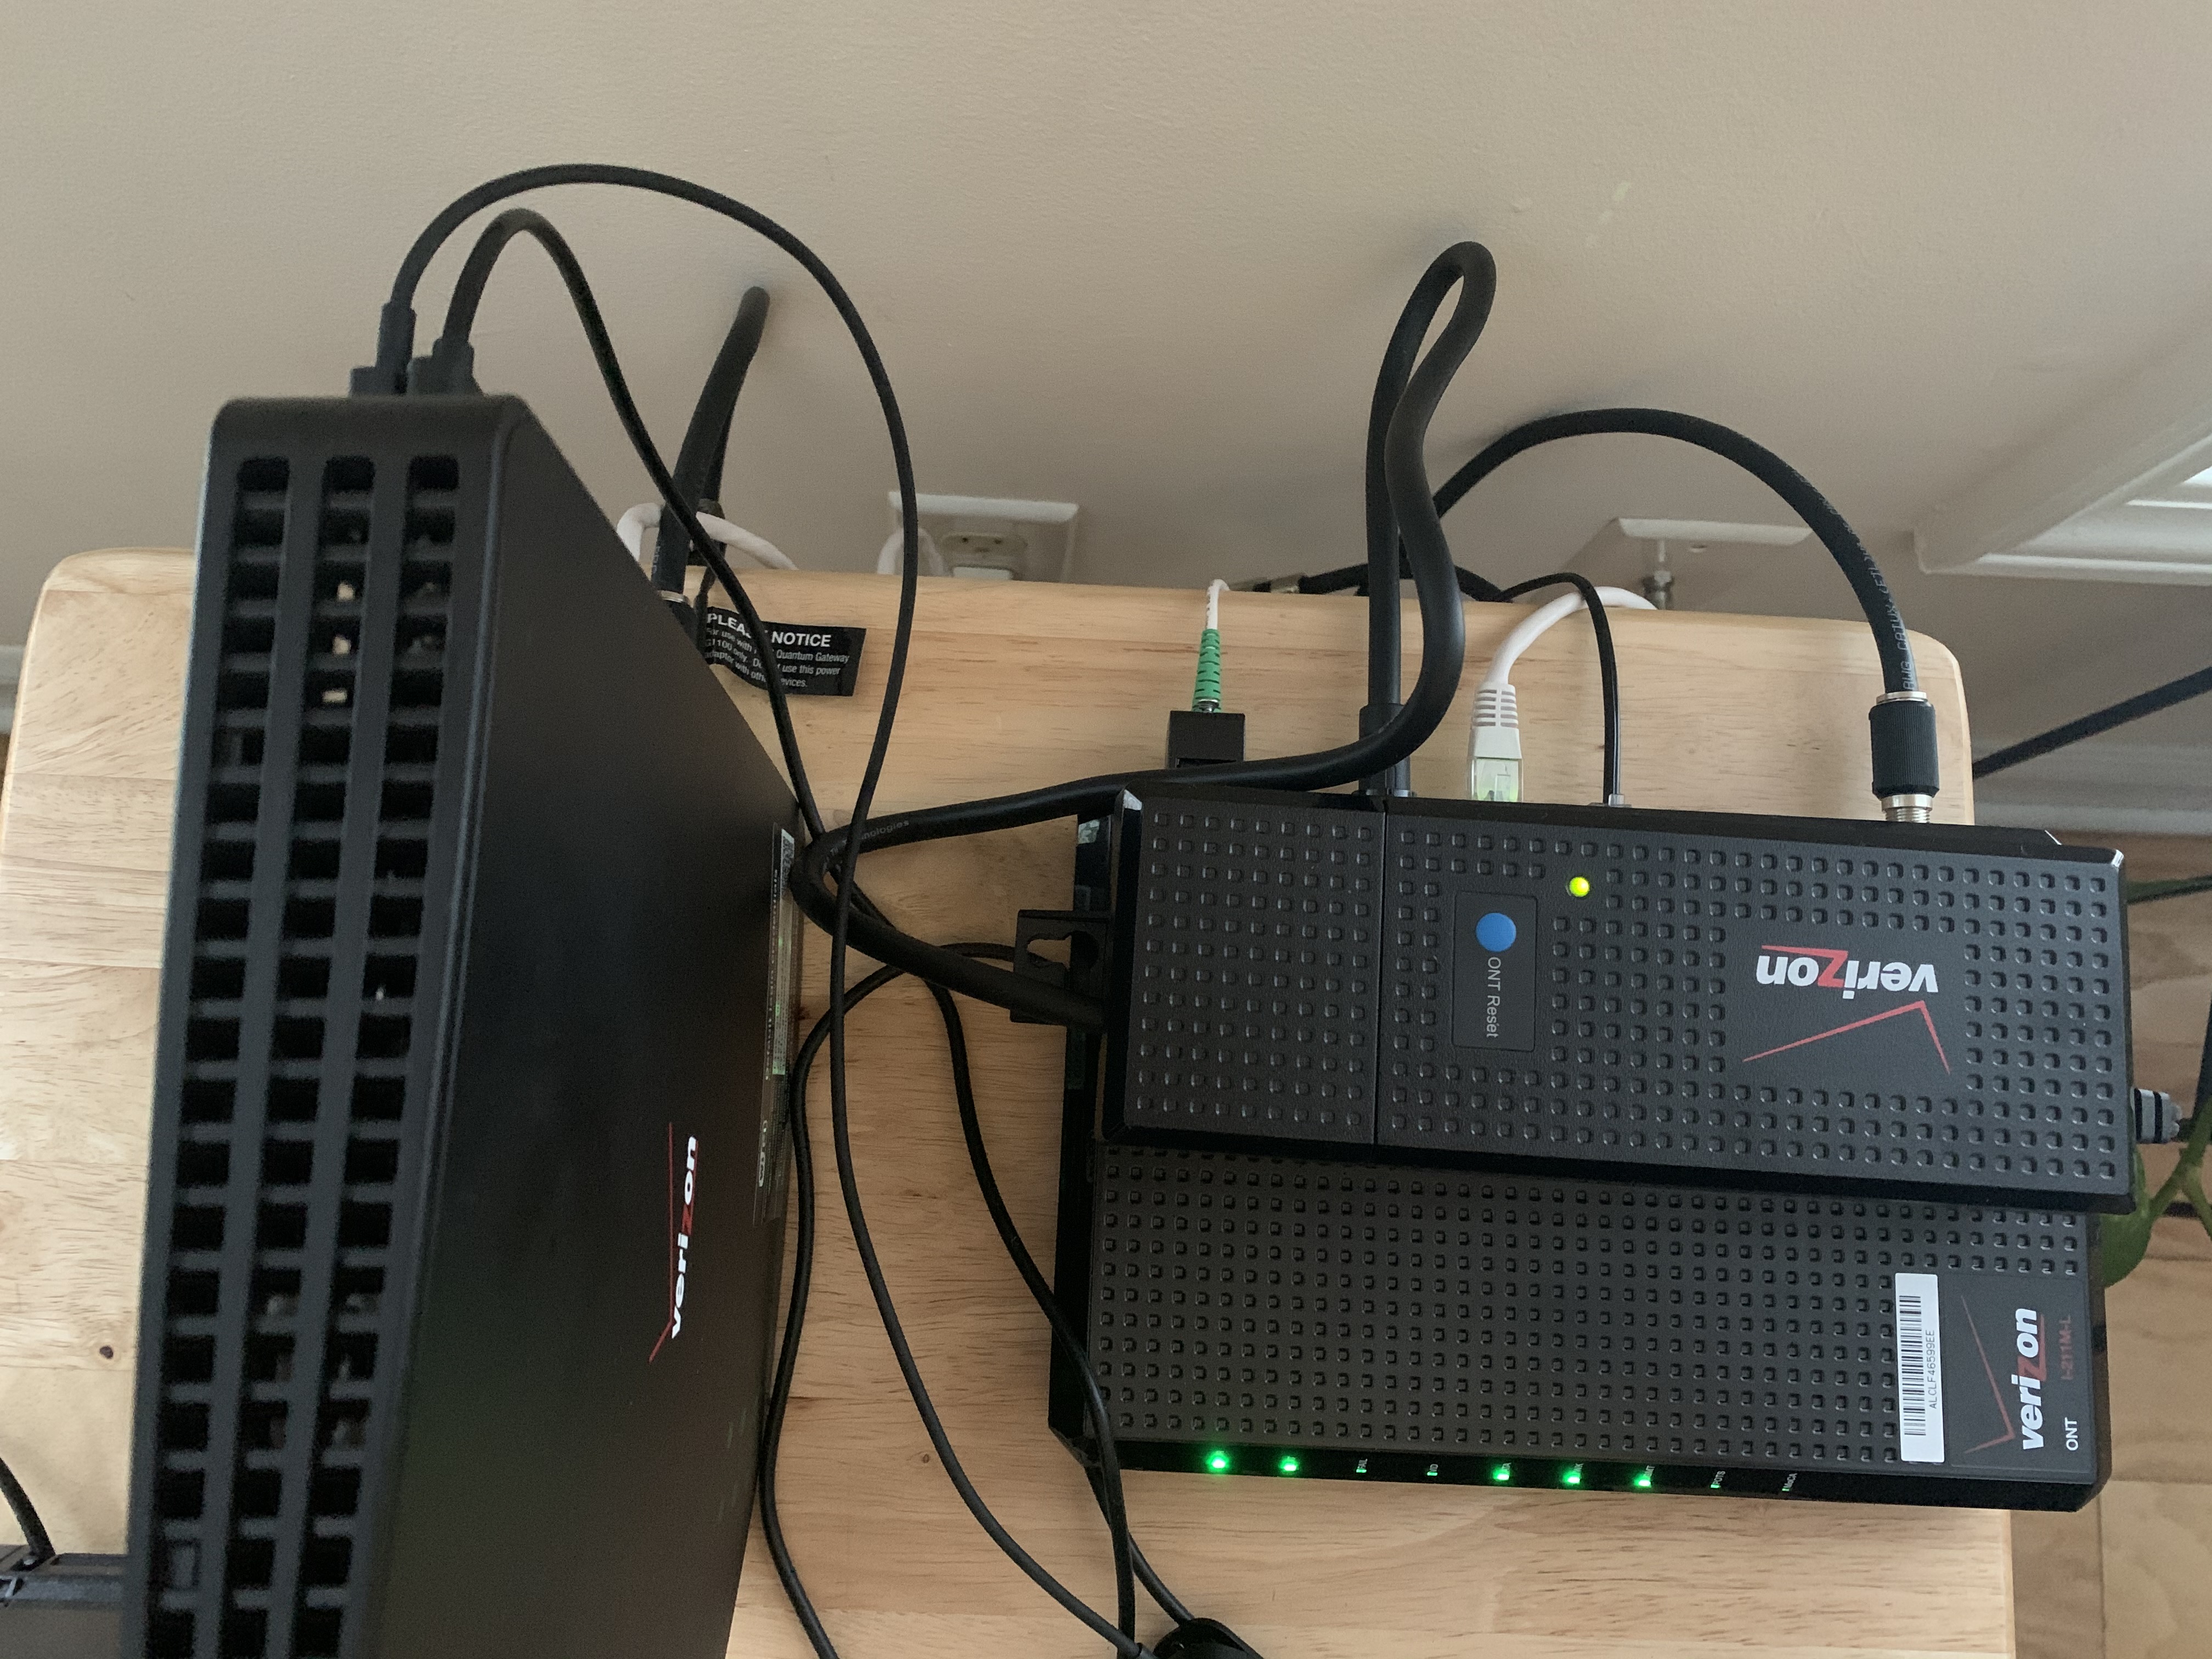 Replacing Fios Router with Orbi - NETGEAR Communities